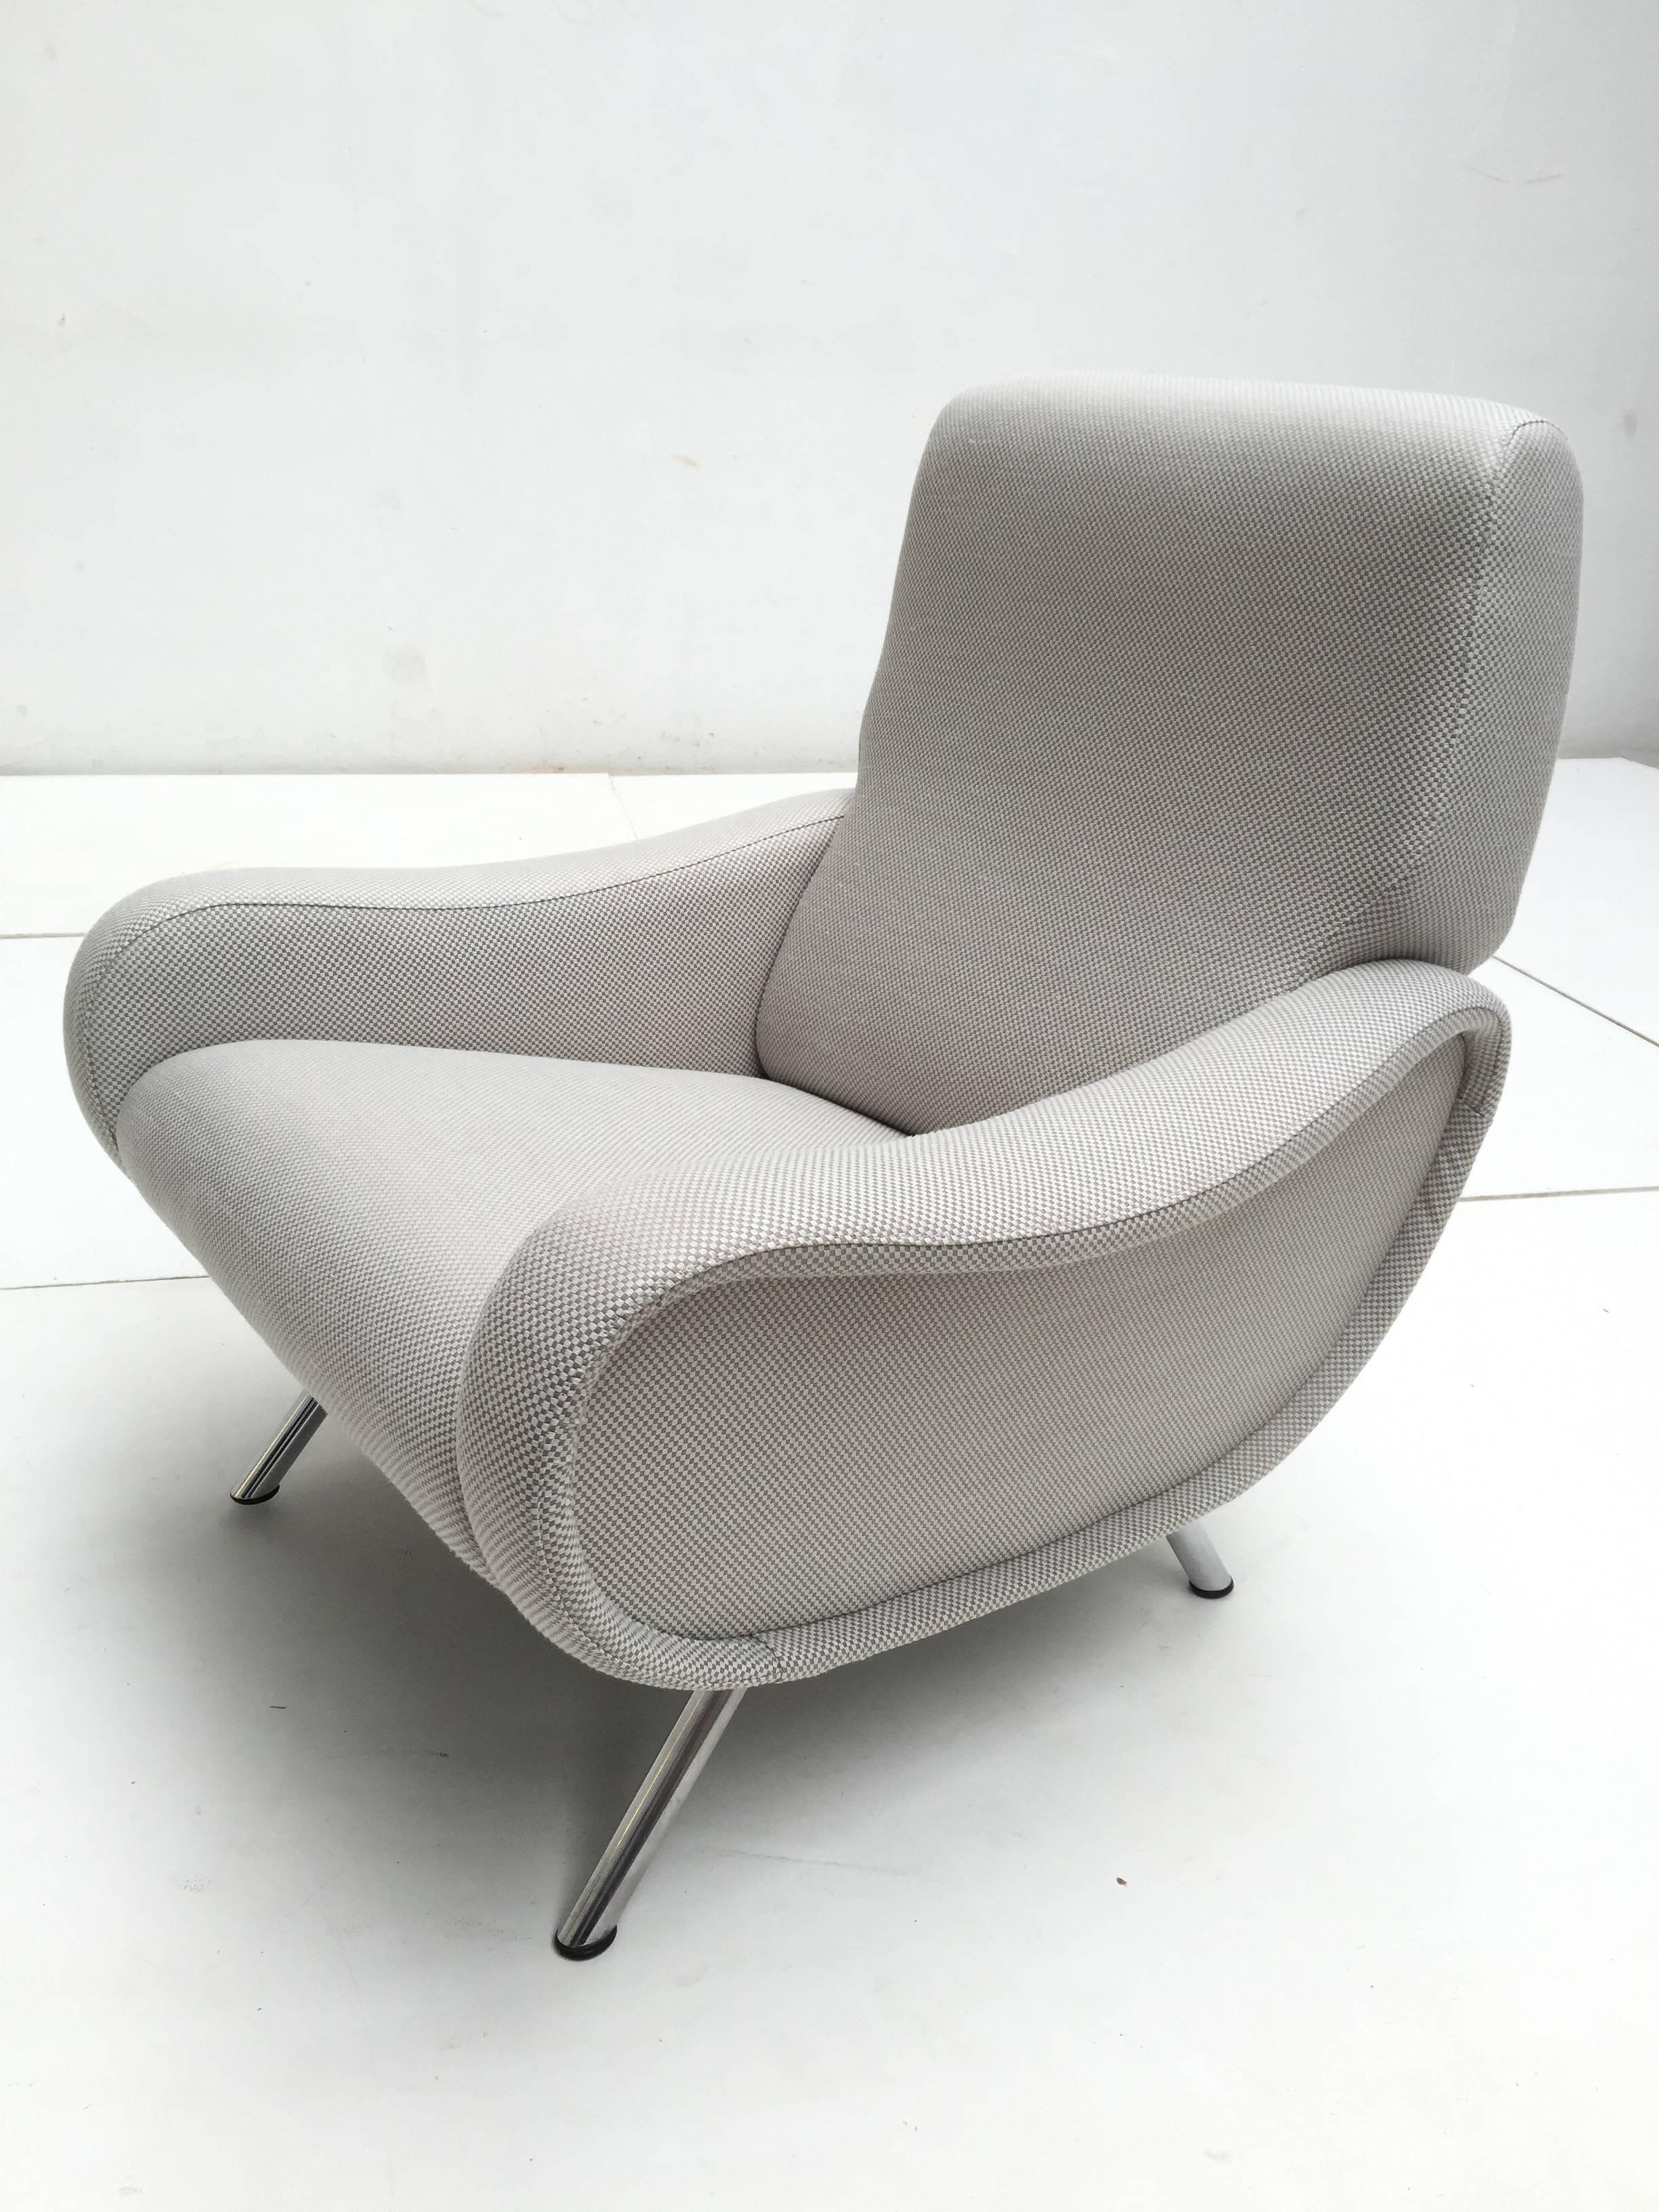 Rubber Restored Silver Op-Art Lady Chair by Marco Zanuso for Arflex, Italy, 1951